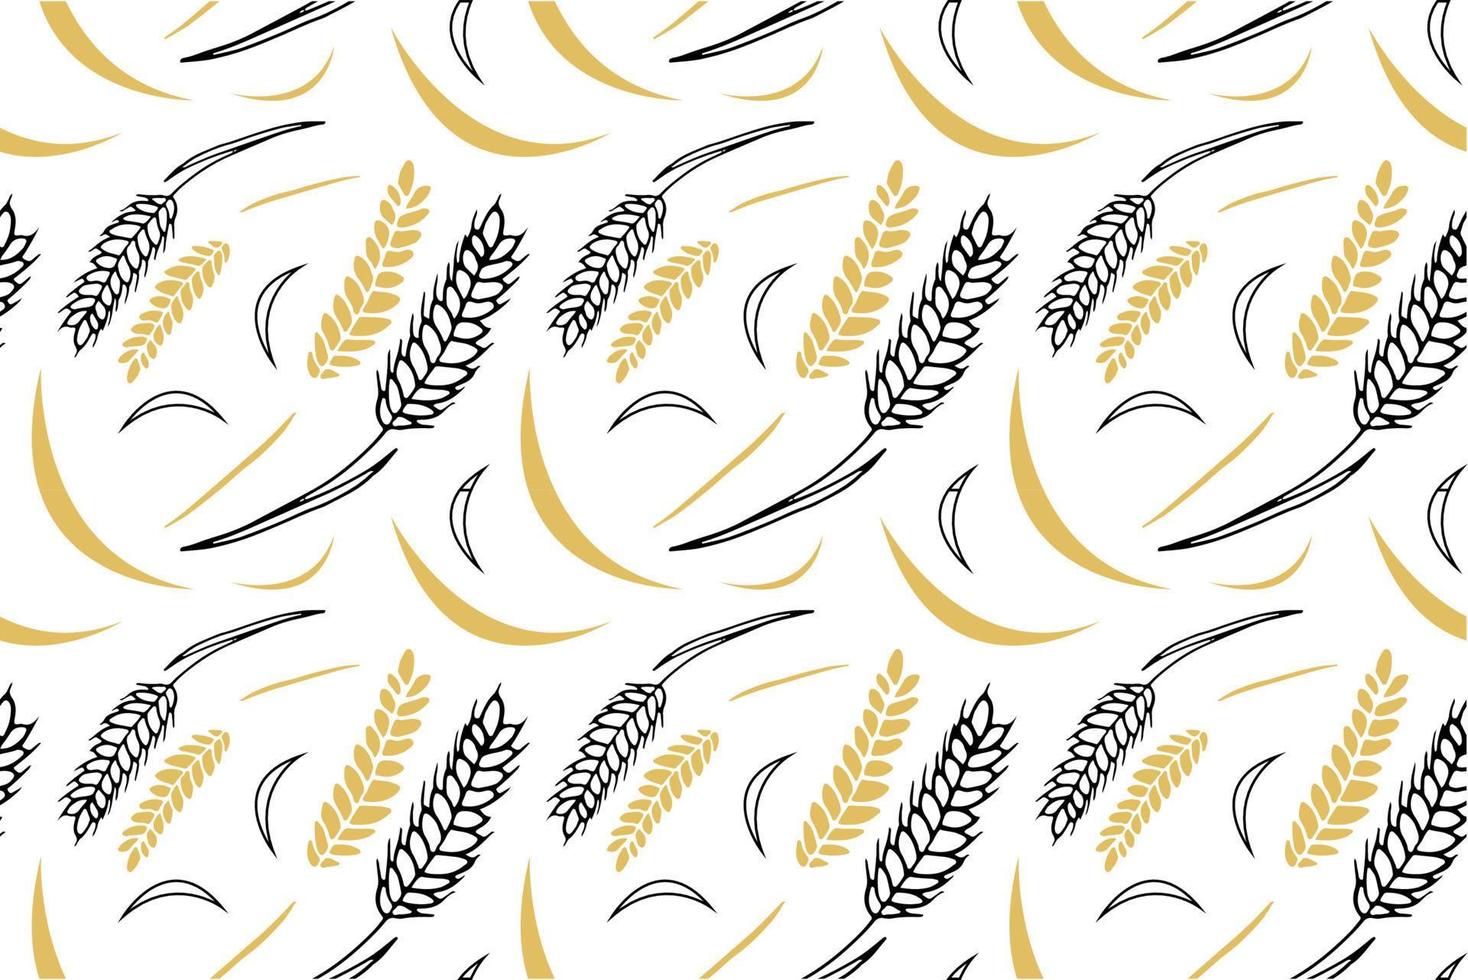 Wheat seamless pattern Doodle style. Vector outline endless image. Trendy wheat theme pattern.